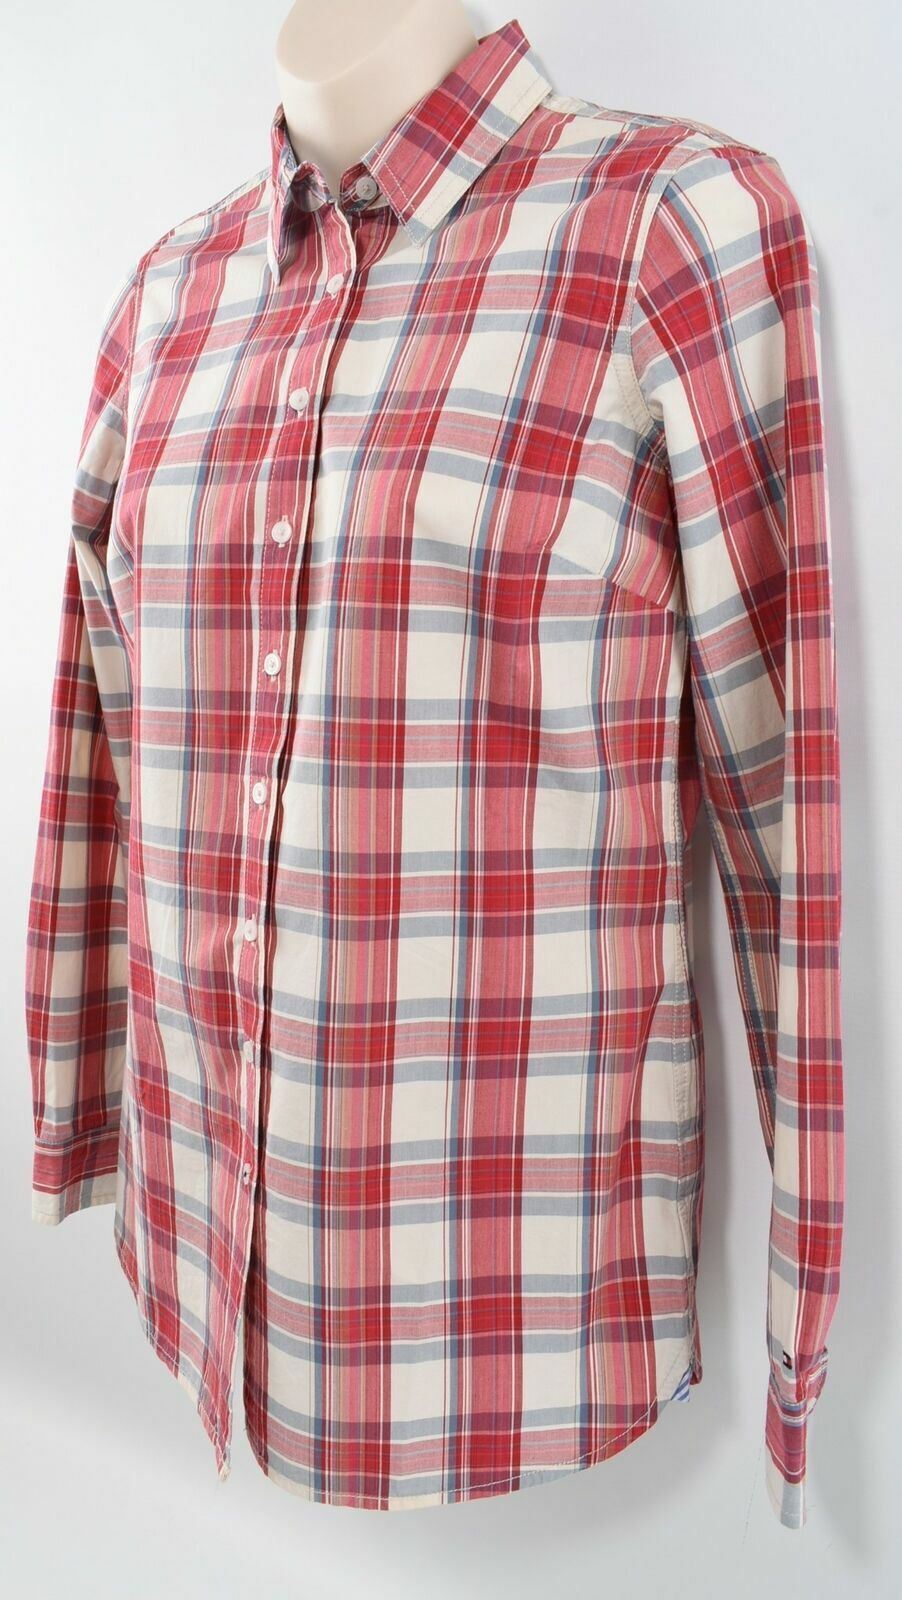 TOMMY HILFIGER Women's Red Plaid Long Sleeved Collared Shirt- UK 6 EU 34